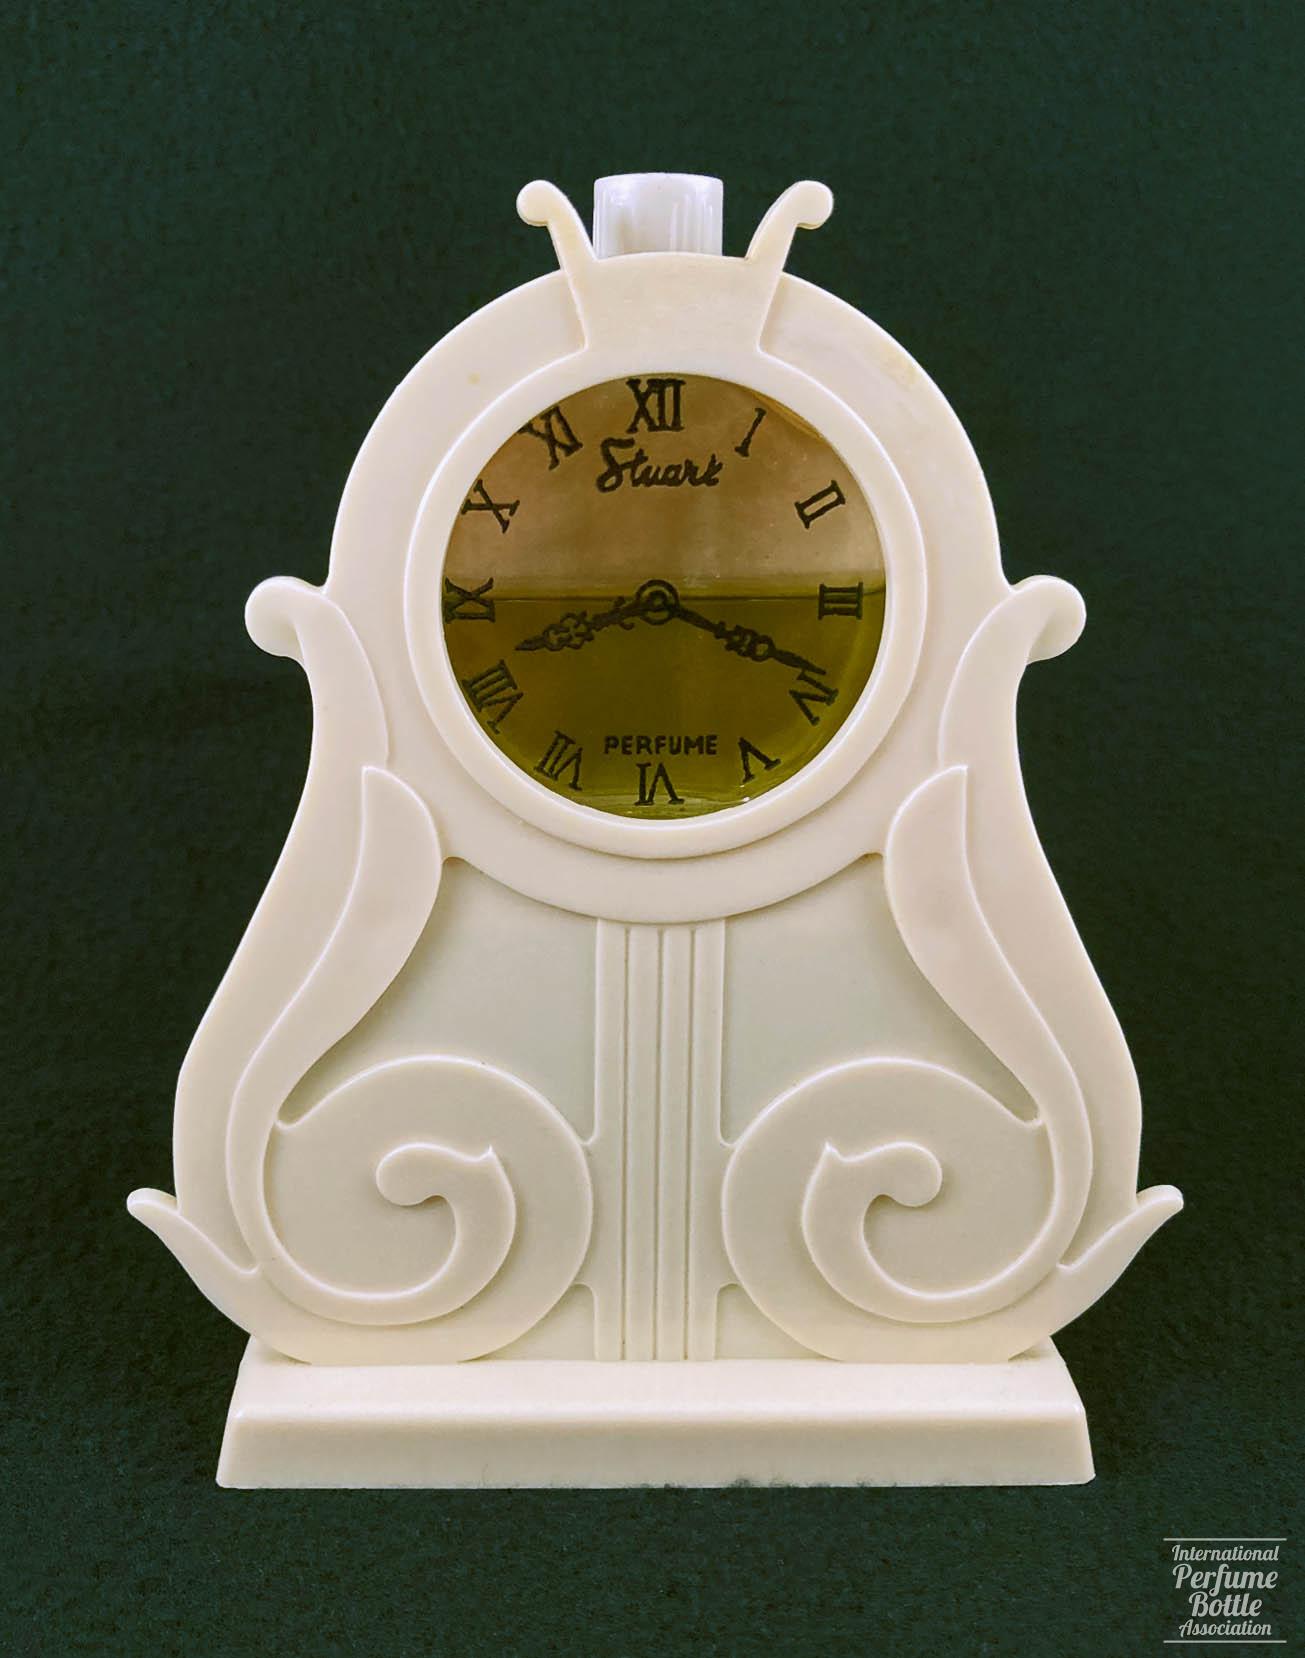 "Perfume-Time" Mantle Clock Presentation by Stuart Products